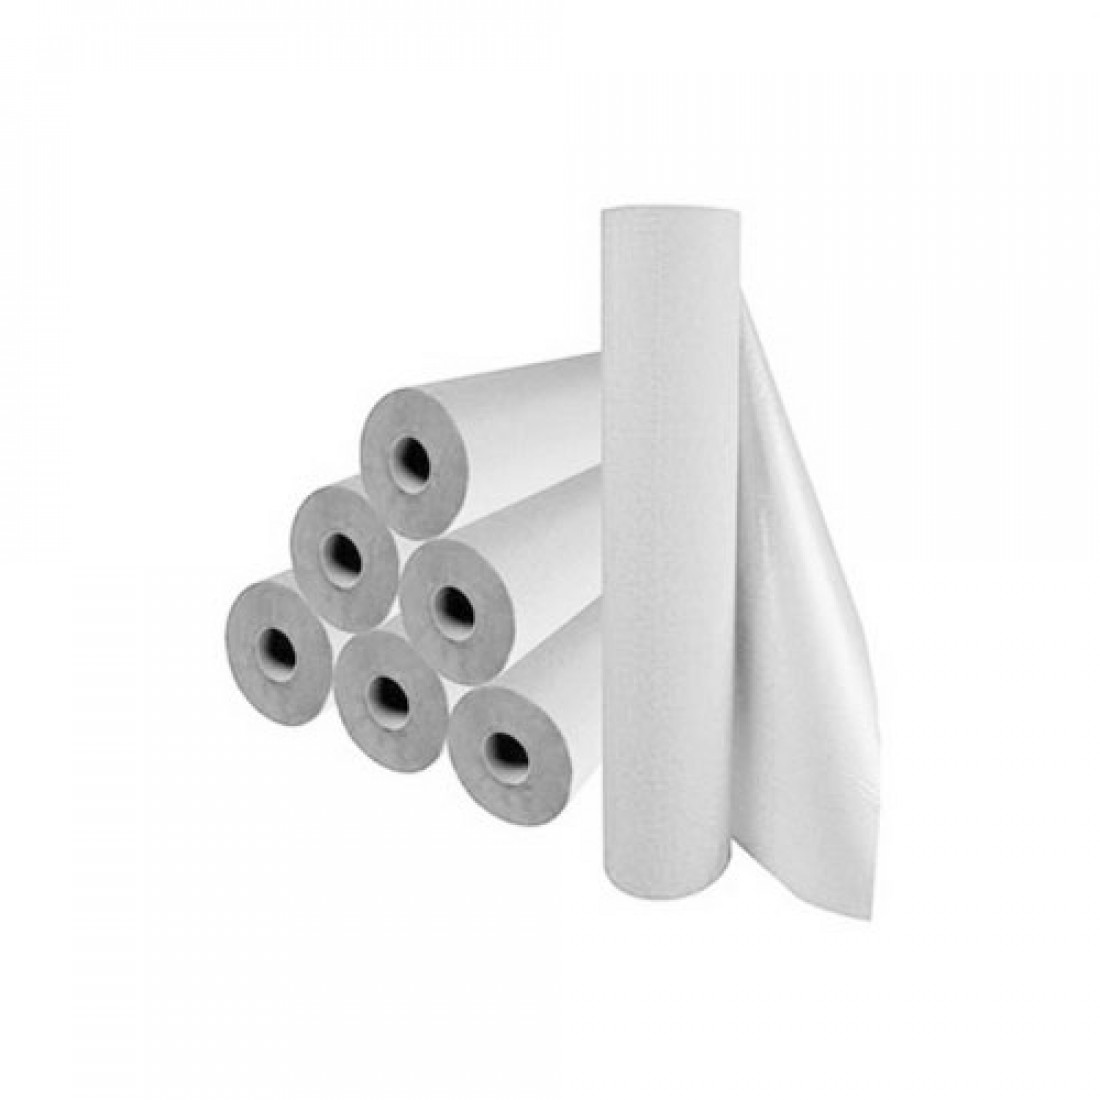 Bed roll paper 68x50cm 12pcs-3710134 SINGLE USE PRODUCTS